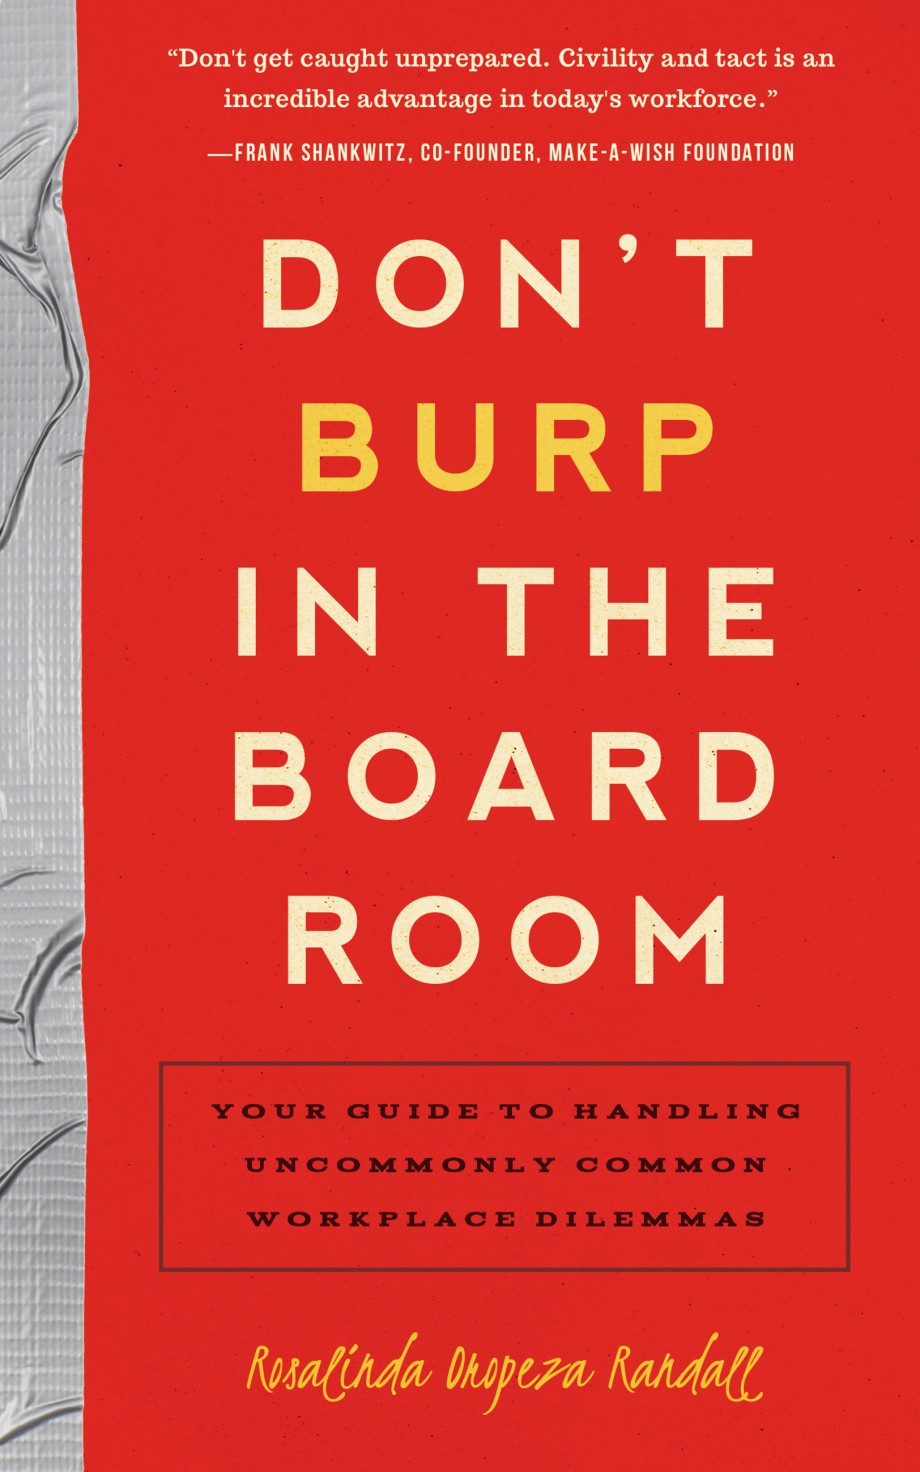 Don't Burp in the Boardroom Your Guide to Handling Uncommonly Common Workplace Dilemmas